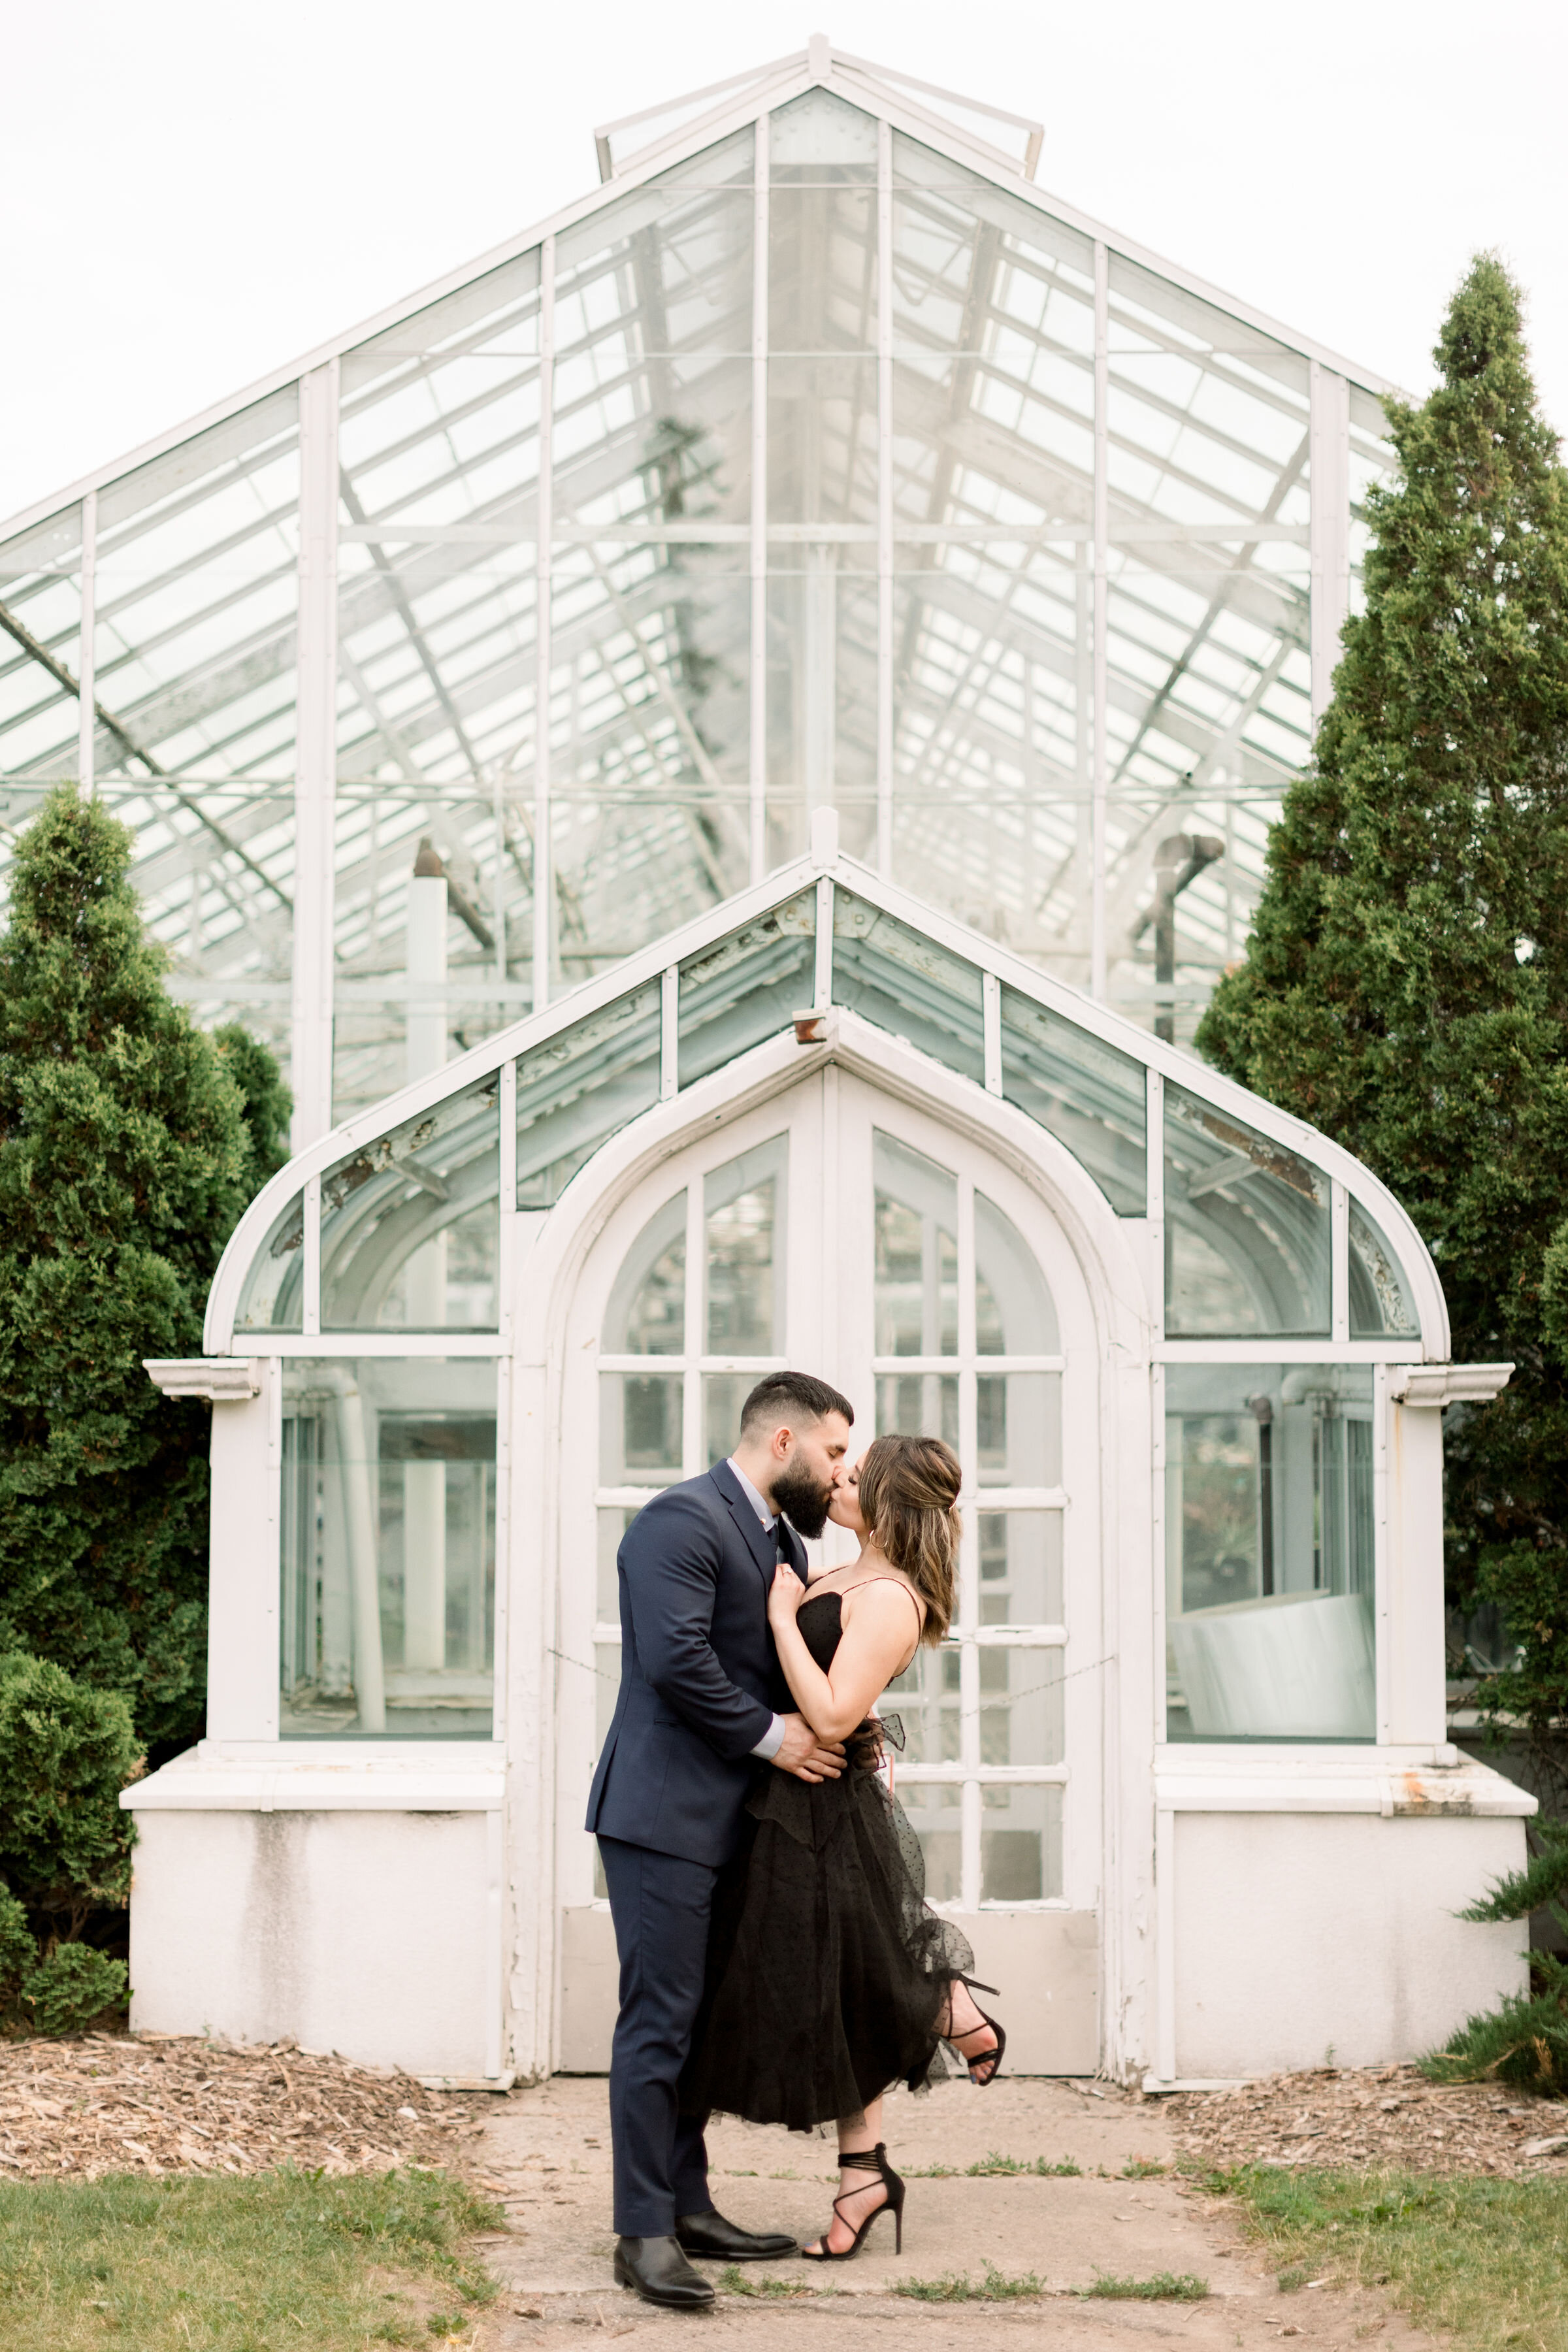  Chelsea Mason Photography captures this engaged couple romantically kissing with a beautiful white greenhouse in the backdrop in Ottawa, Ontario. greenhouse engagement session groom passionately kissing fiancé while she pops her foot #ChelseaMasonPh